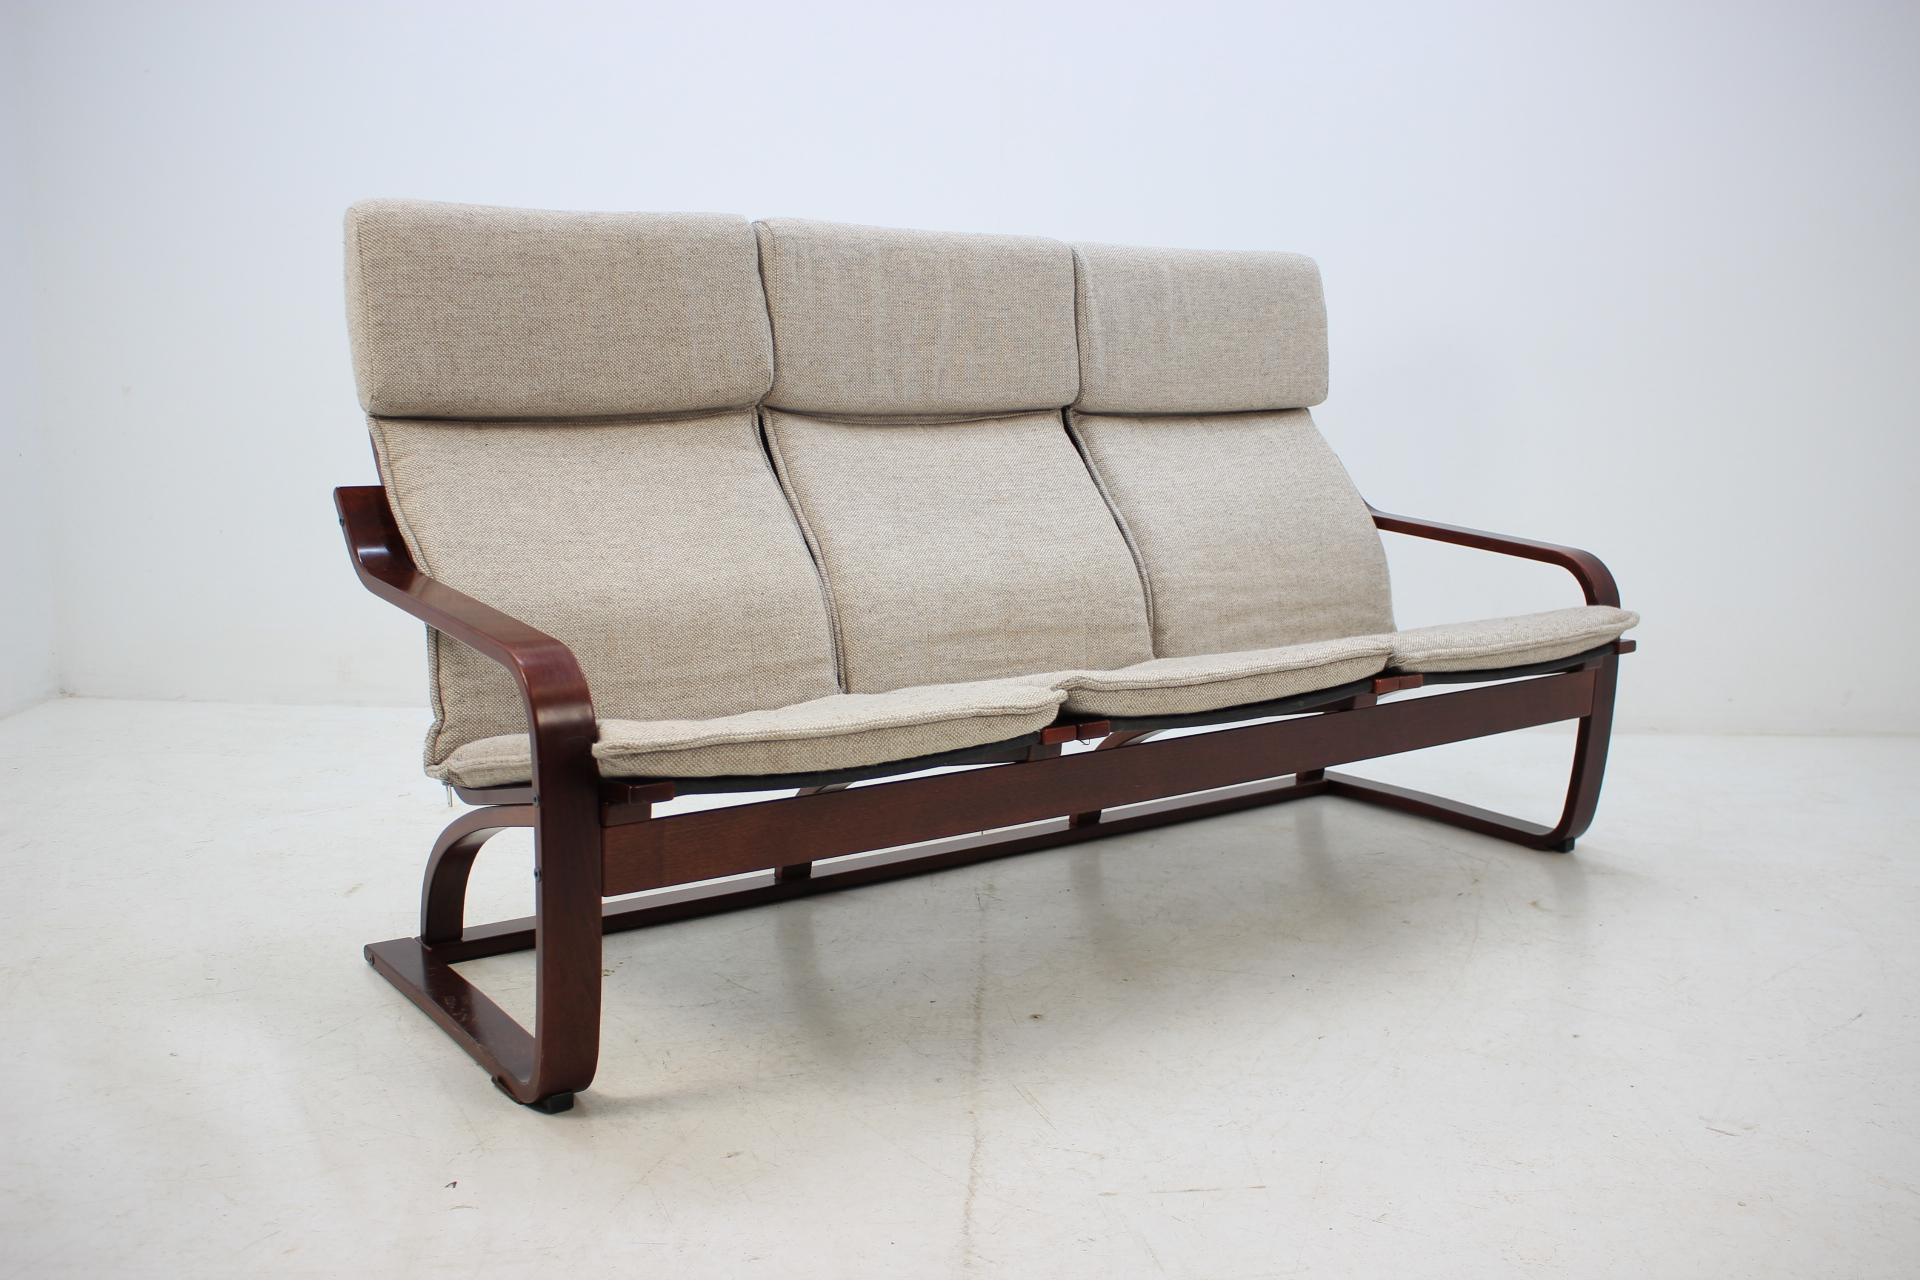 Produced by Ton, Czechoslovakia in late 1980s.
The frame is made from beech bentwood.
The original cushions and the item are in good original condition.